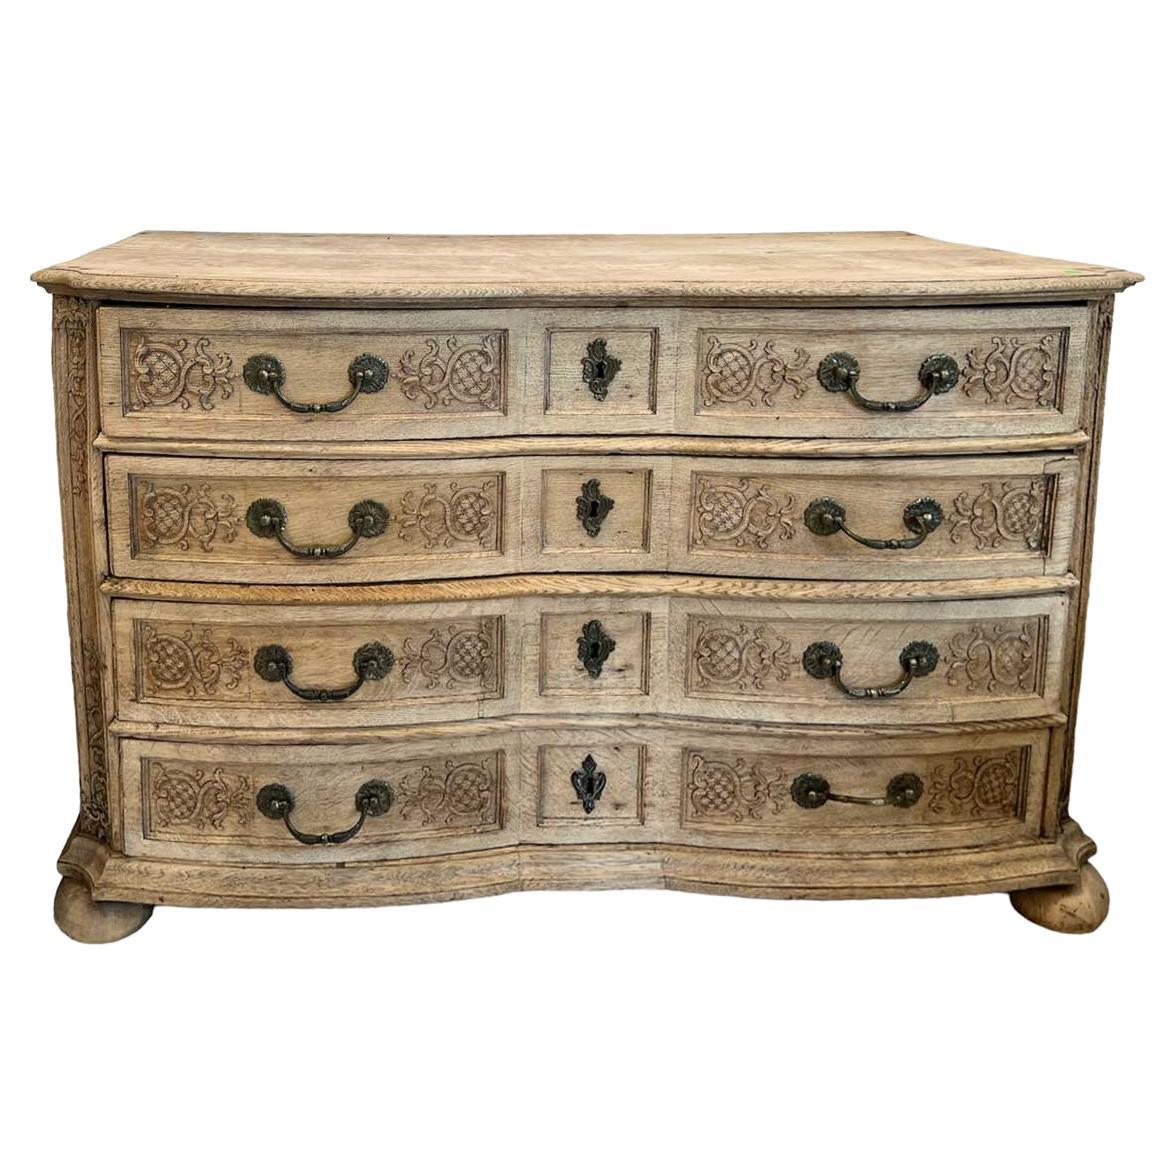 18th Century Bleached Oak Chest with Liege Carving